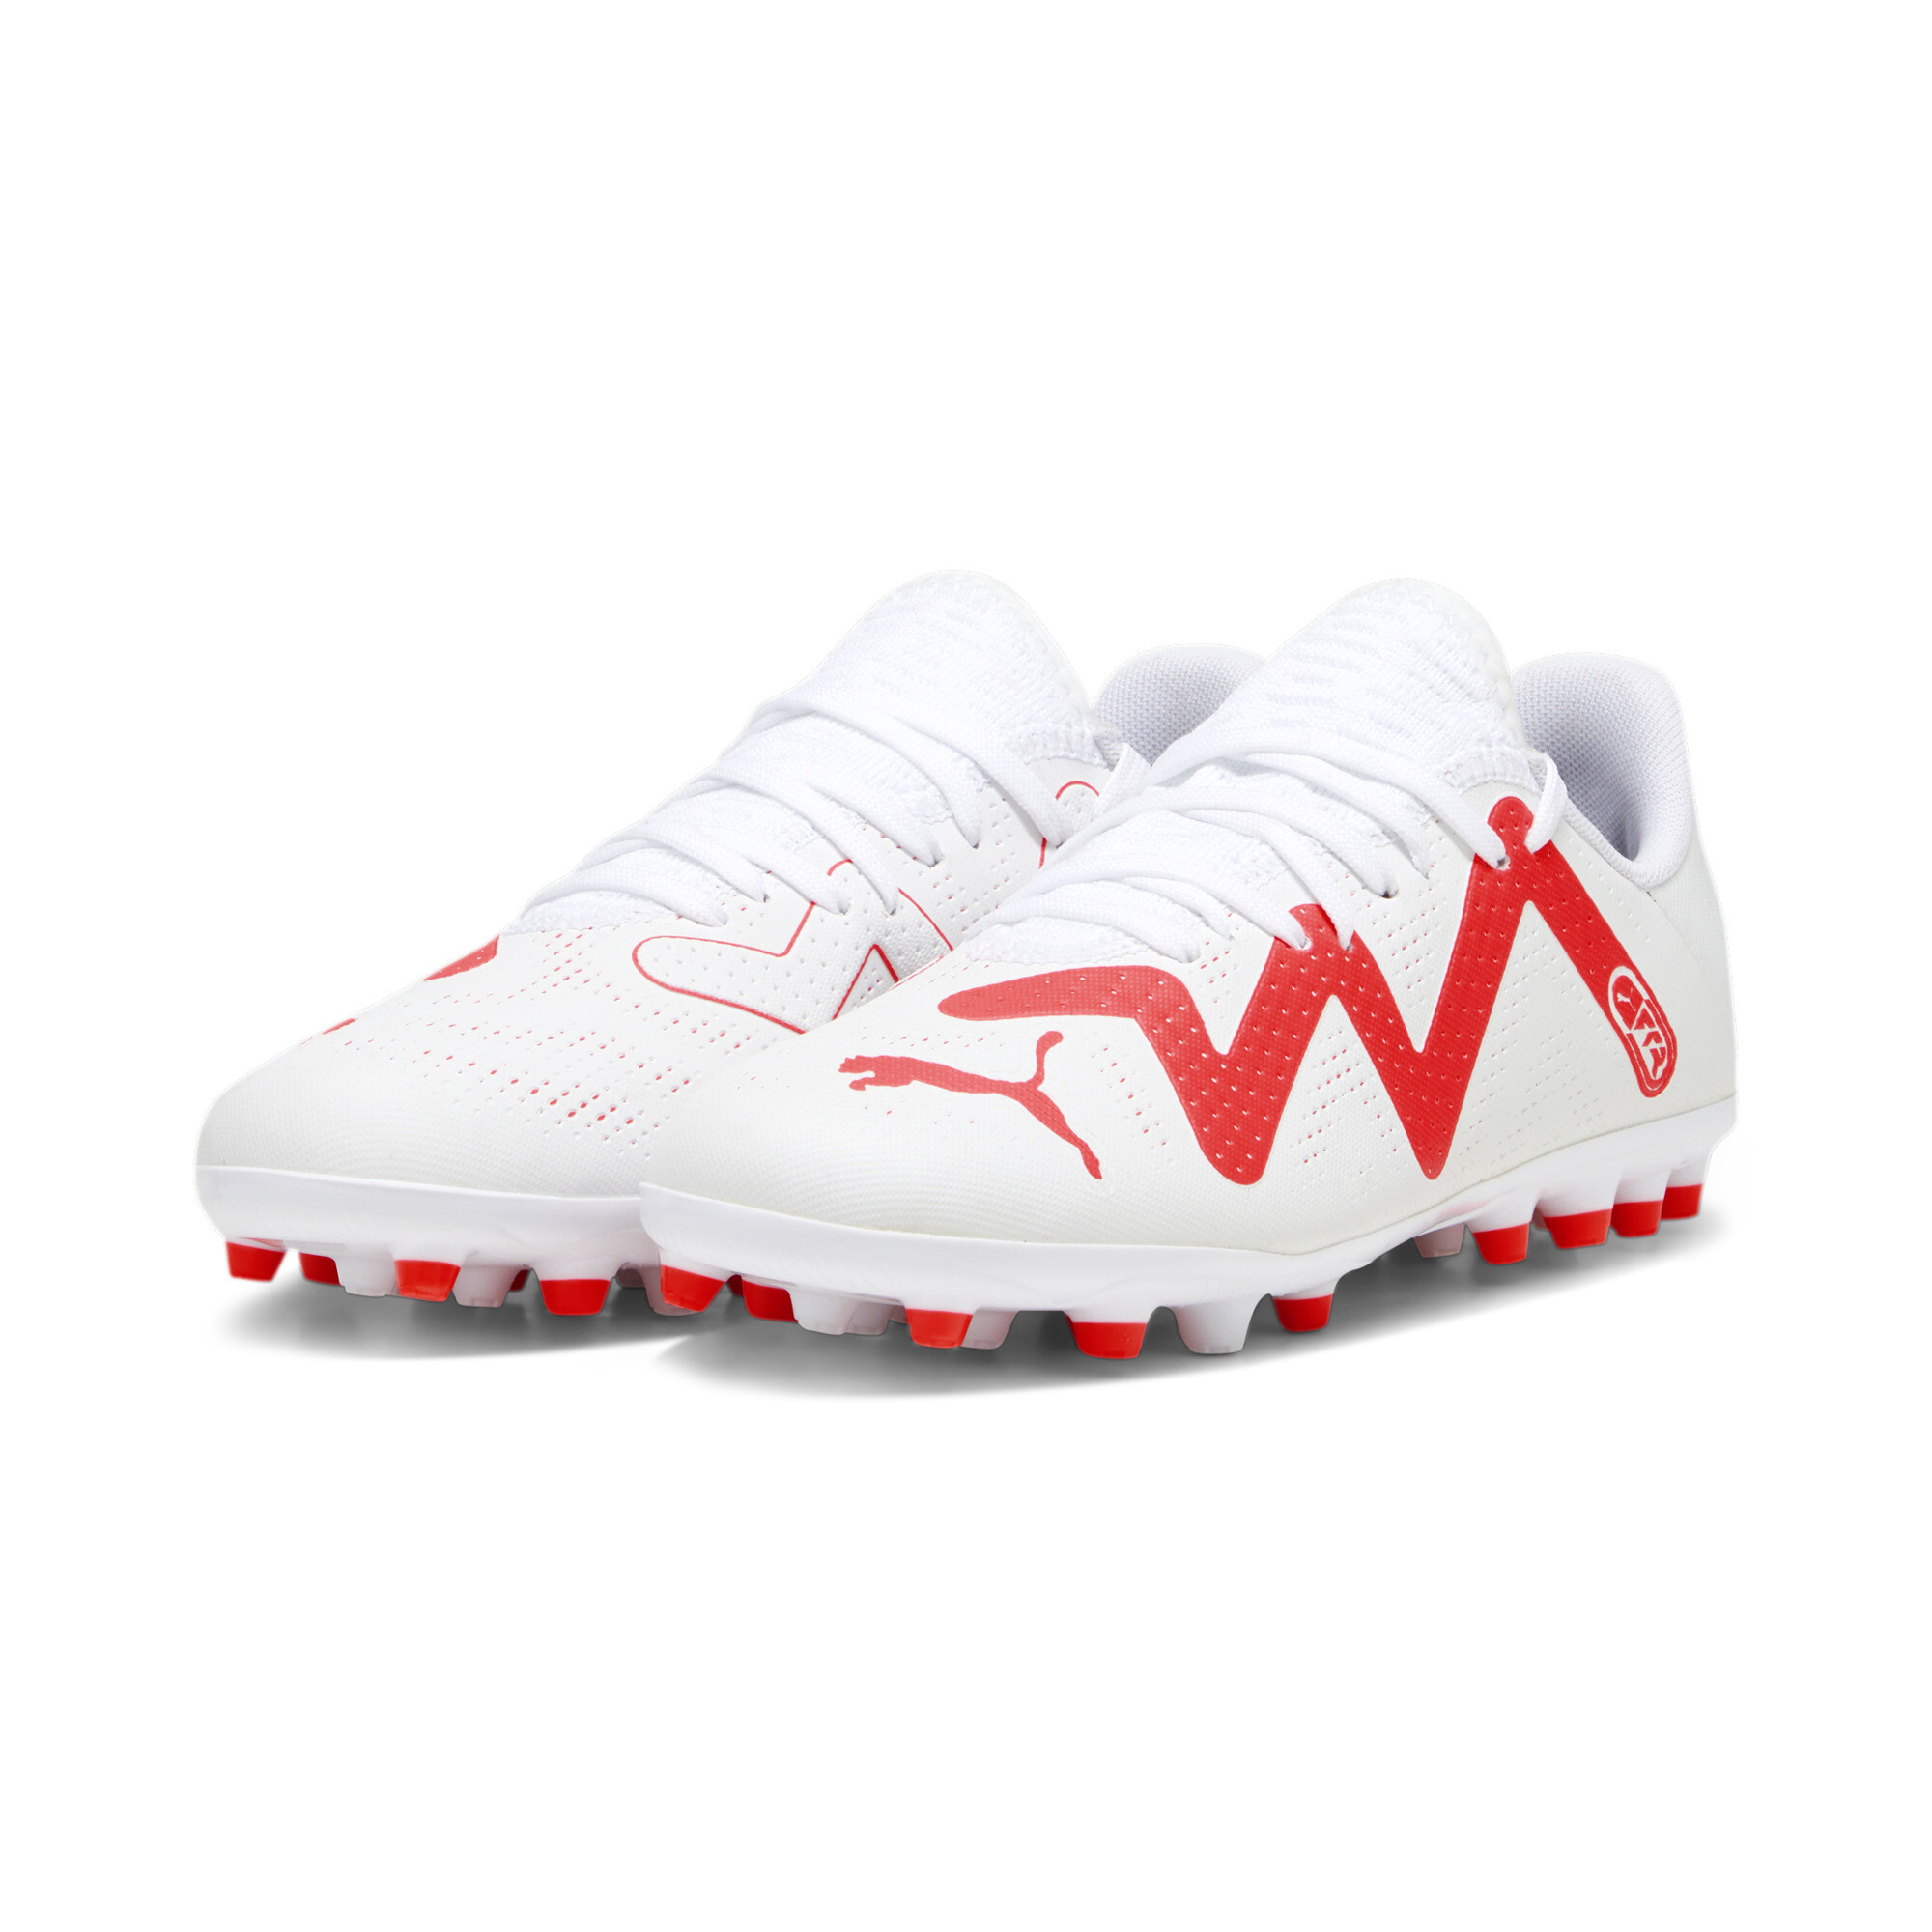 Puma FUTURE PLAY MG Youth Football Boots, White, Size 29, Shoes